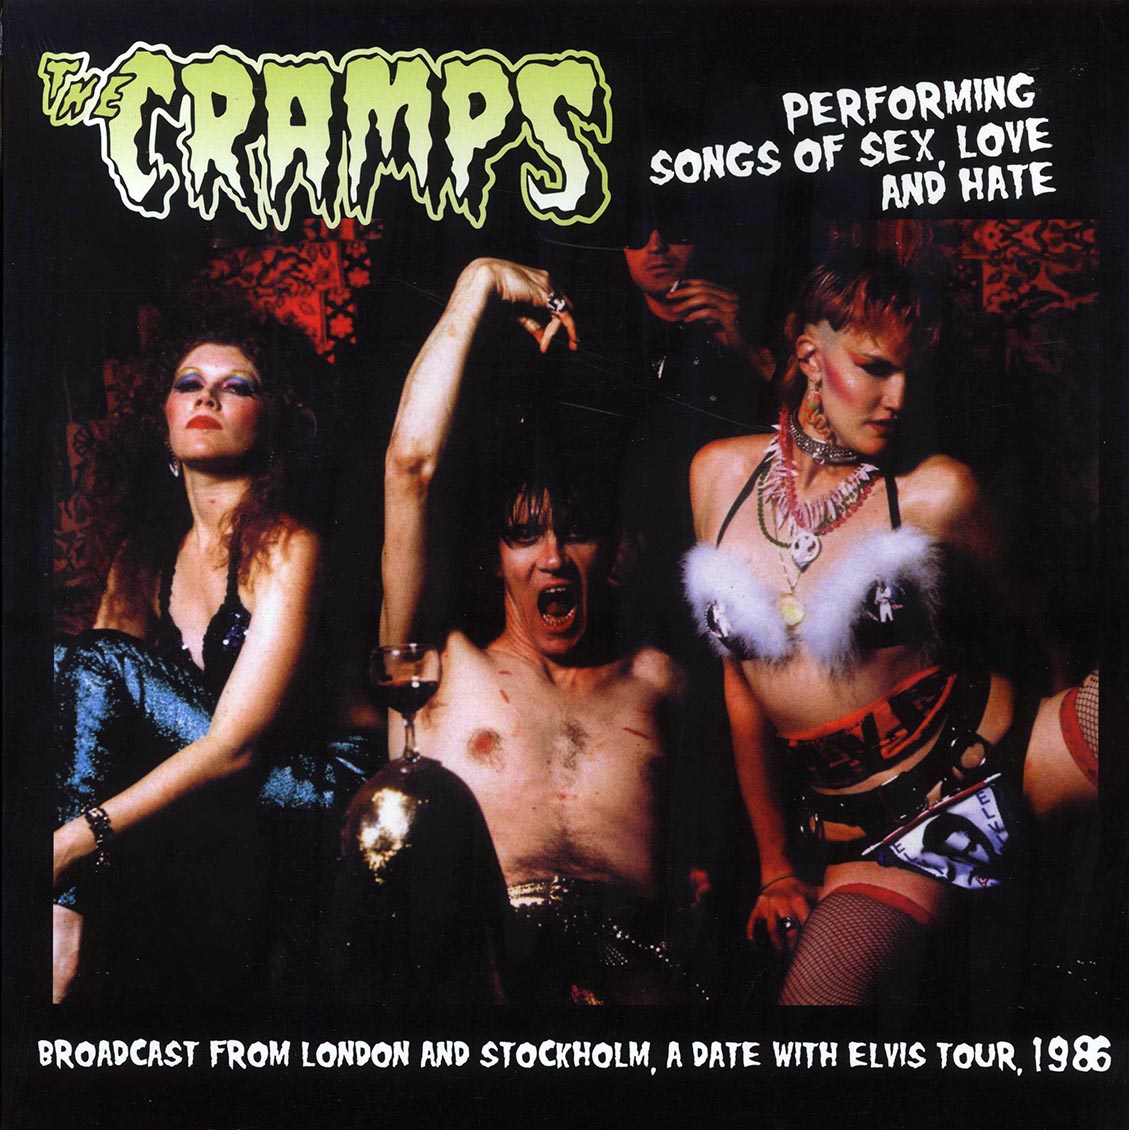 The Cramps - Performing Songs Of Sex, Love And Hate: Broadcast From London And Stockholm 1986 (ltd. 500 copies made) (pink vinyl) - Vinyl LP